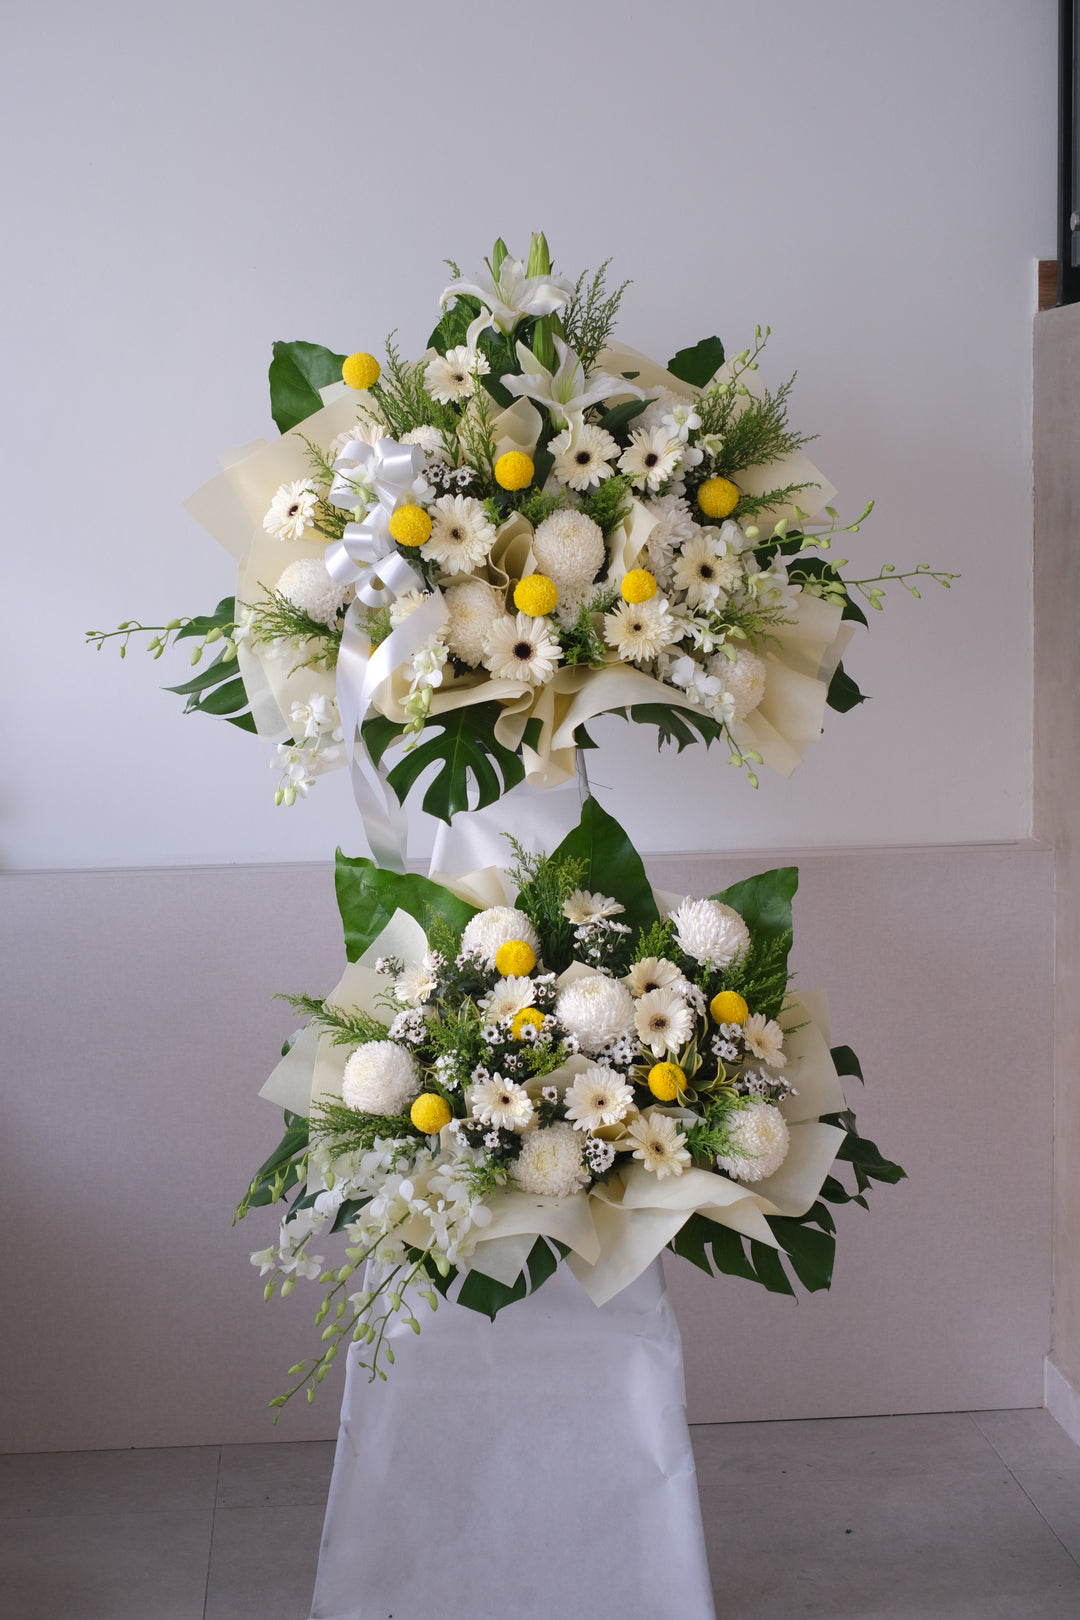 Same-day condolences flowers delivery in Penang - A serene arrangement of white hydrangeas, gerberas, roses, fillers, and greens, expressing love and remembrance during a difficult time."